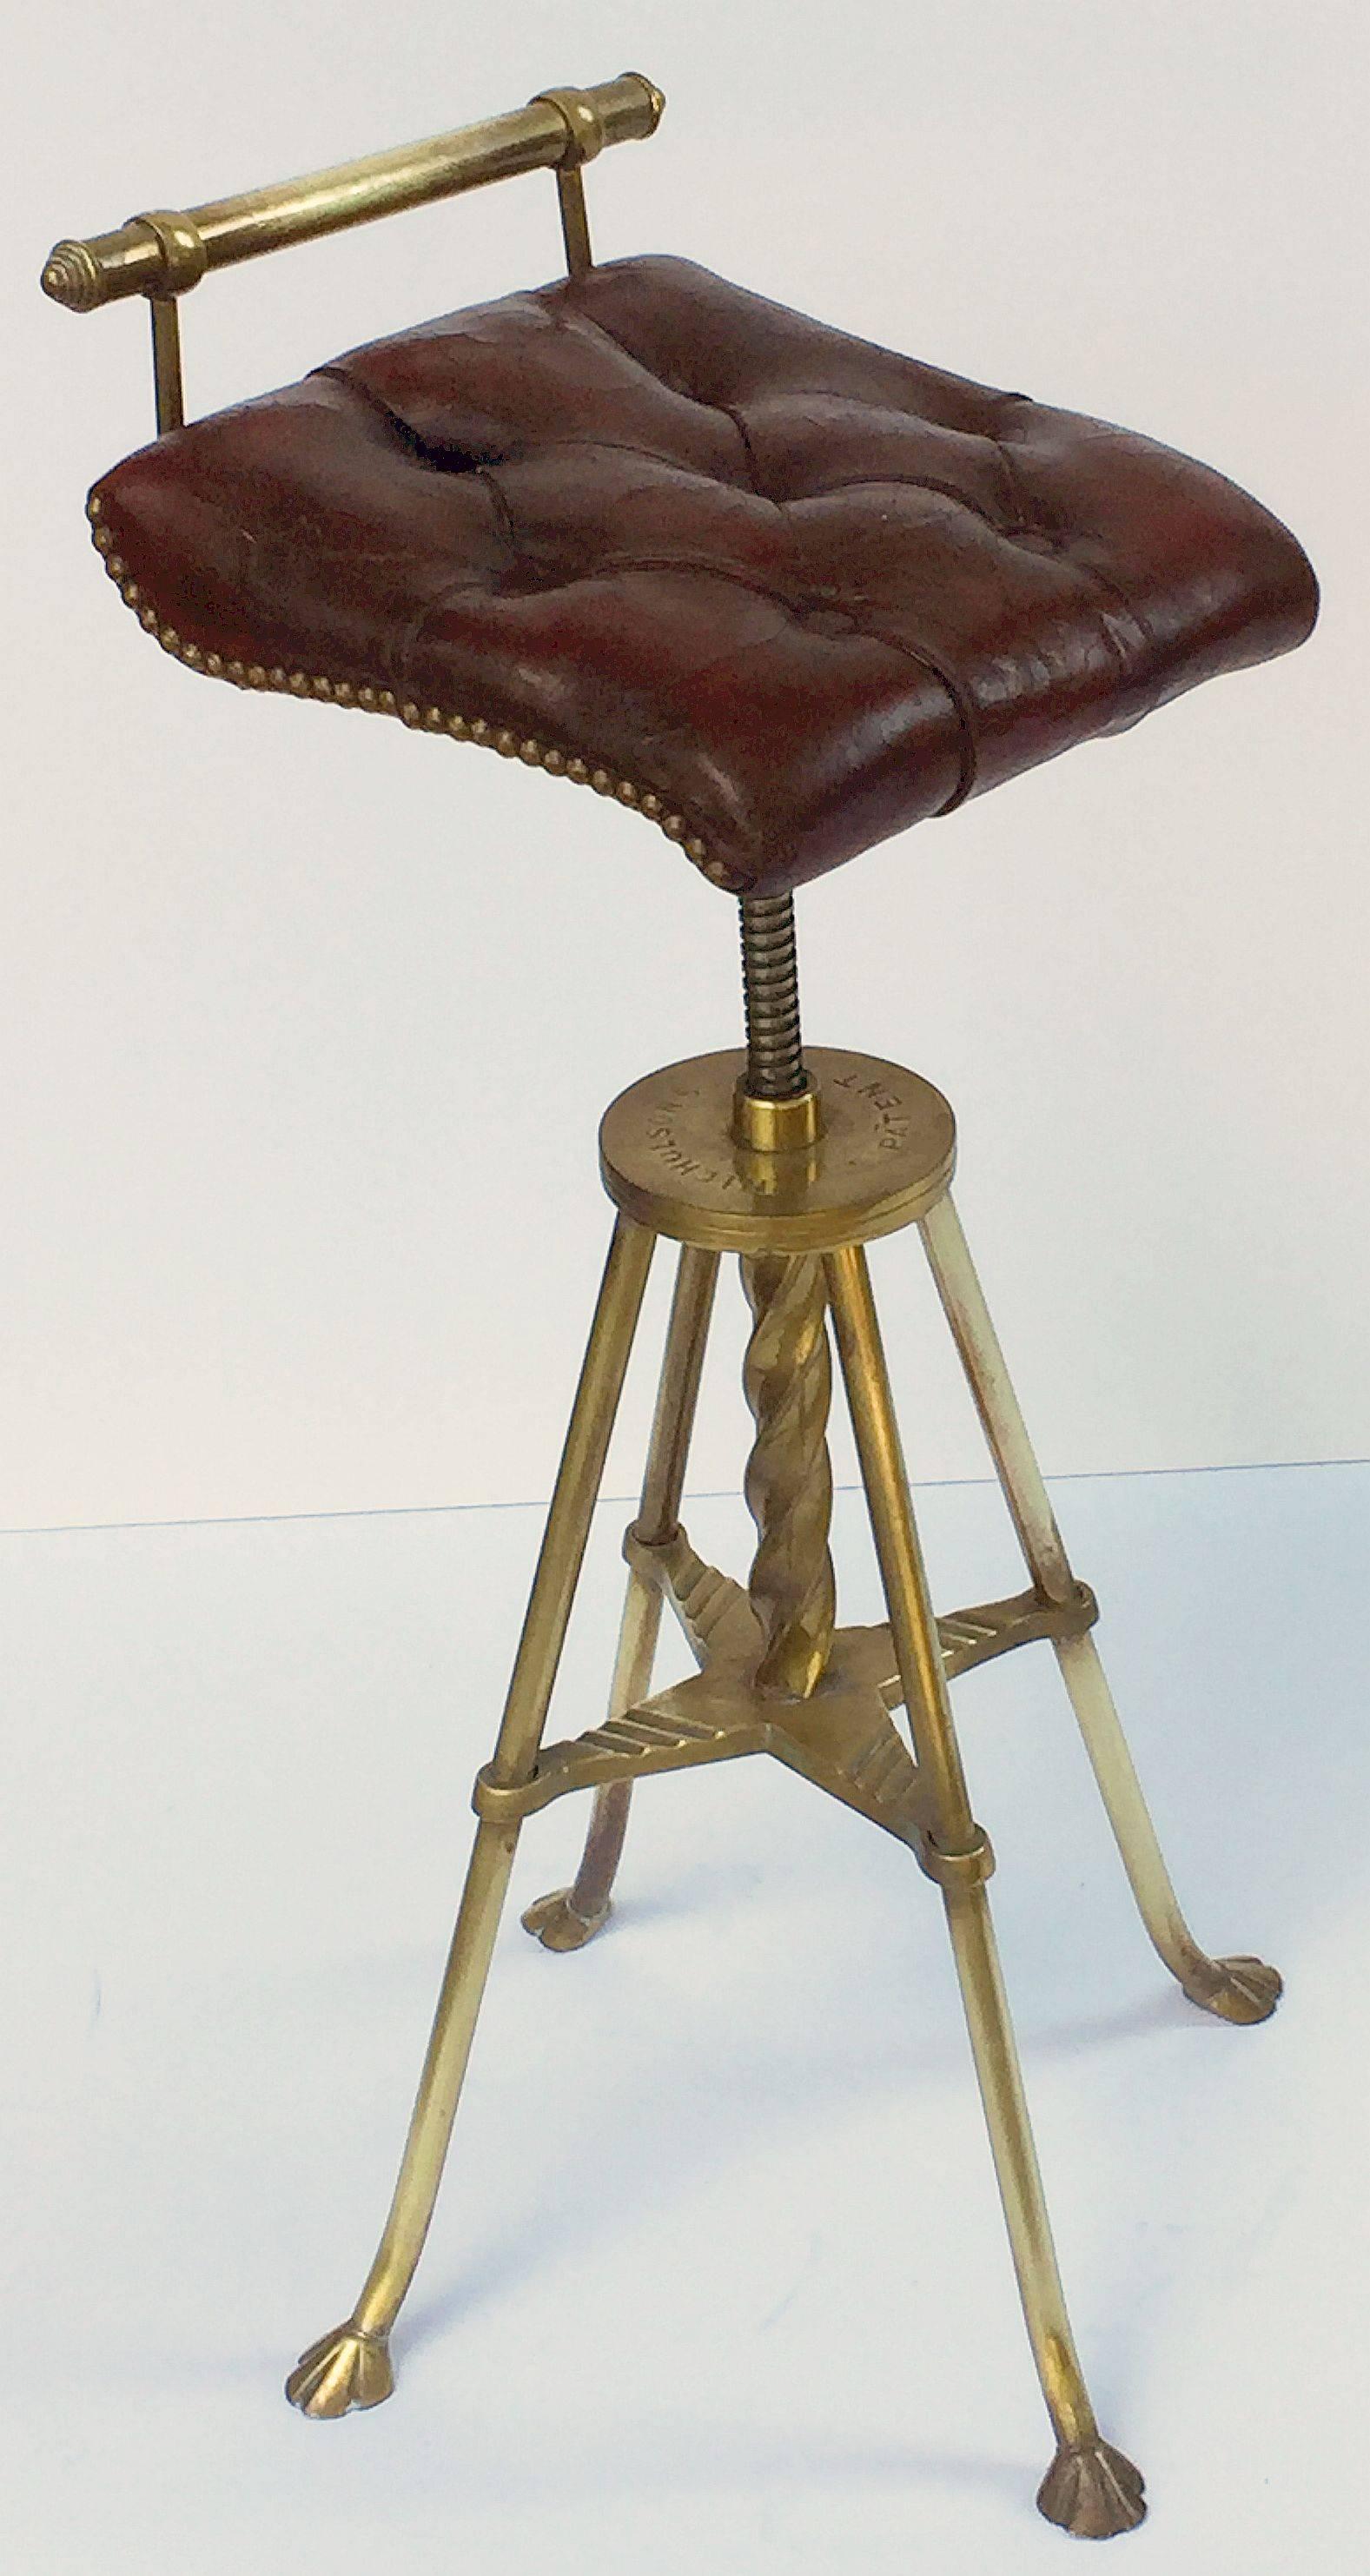 A fine English harpist's stool of brass with rotating or swivel seat with original button leather upholstery, mounted to four-legged stool base with barley-twist and crossbar brace. Adjusts to various heights for comfort of the musician.

Marked: